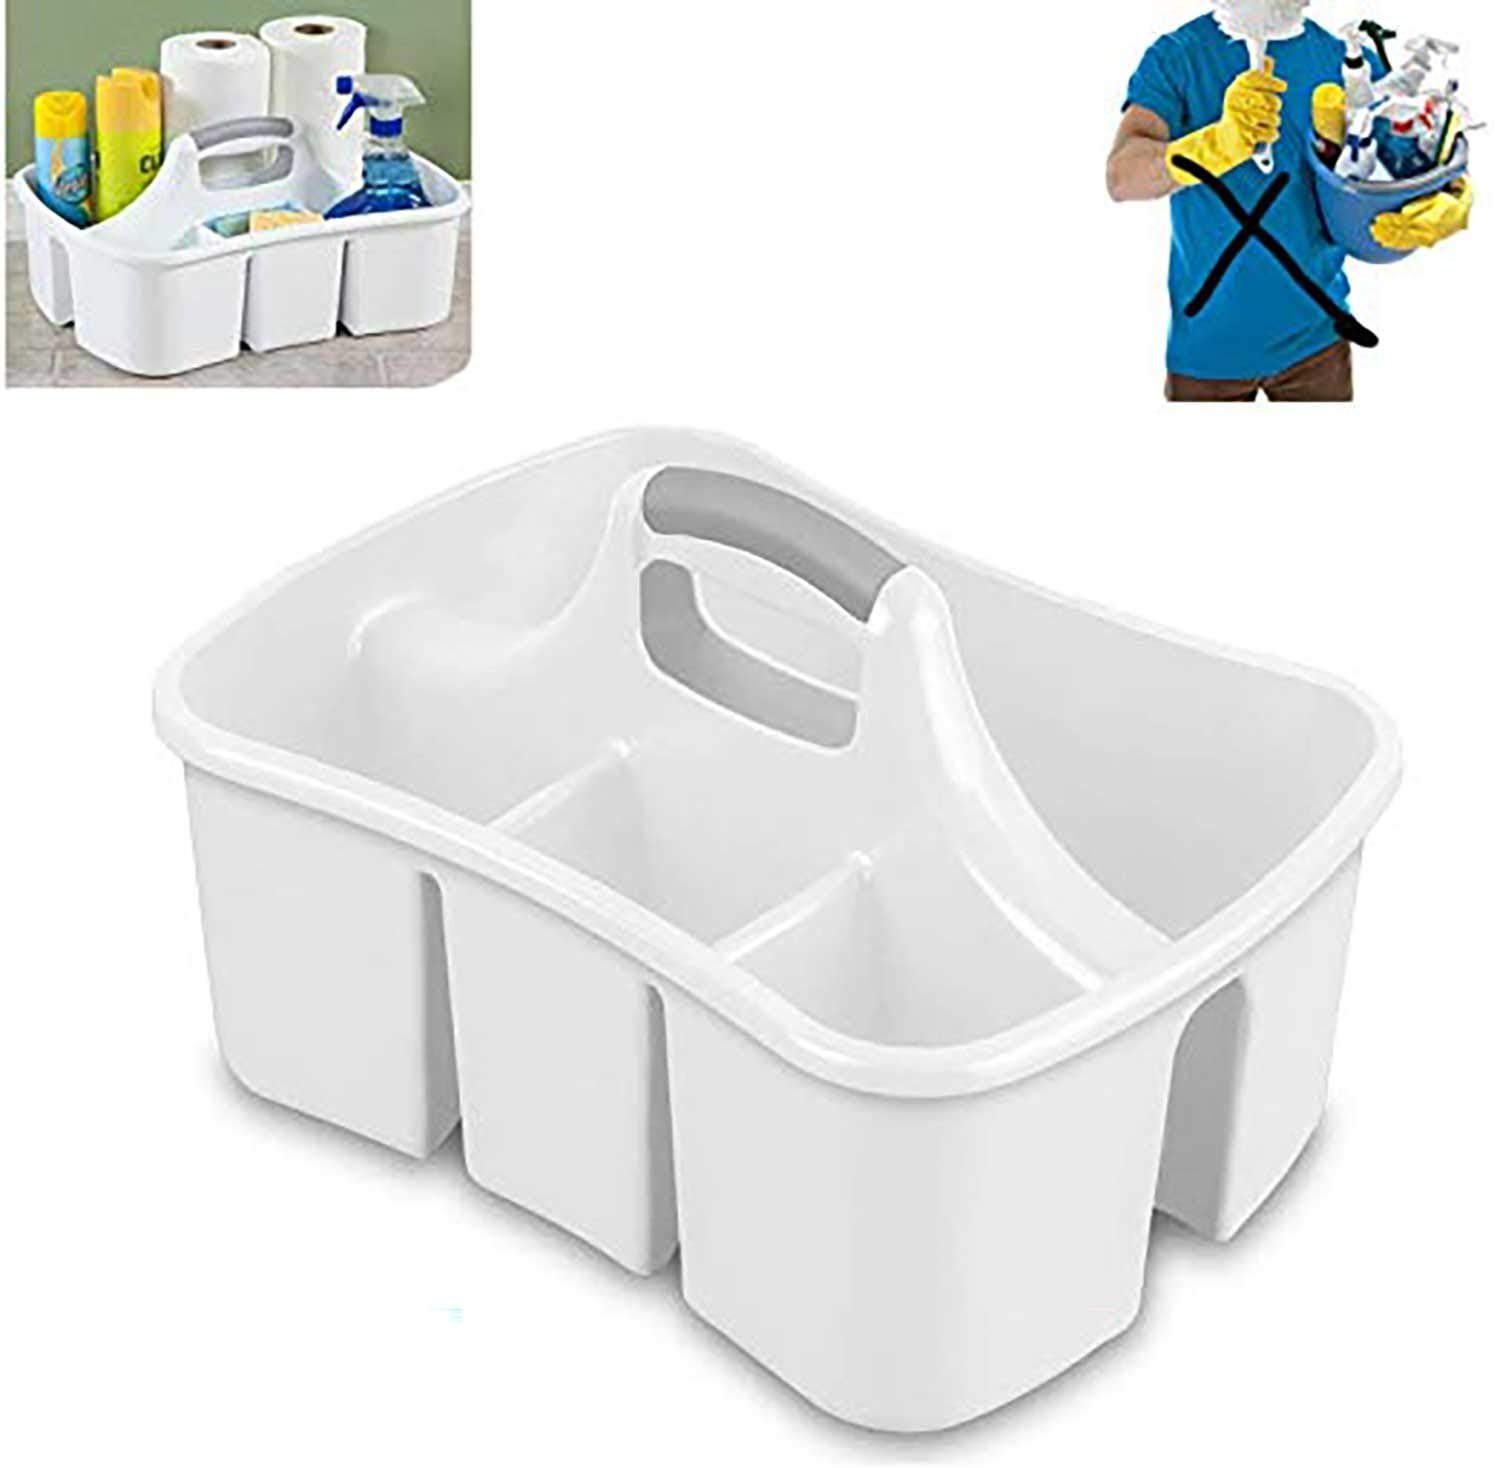 AOOOWER Portable Storage Basket Cleaning Caddy Storage Organizer Tote with  Handle for Laundry Bathroom Kitchen Spray Bottles Clothes Brush Supplies